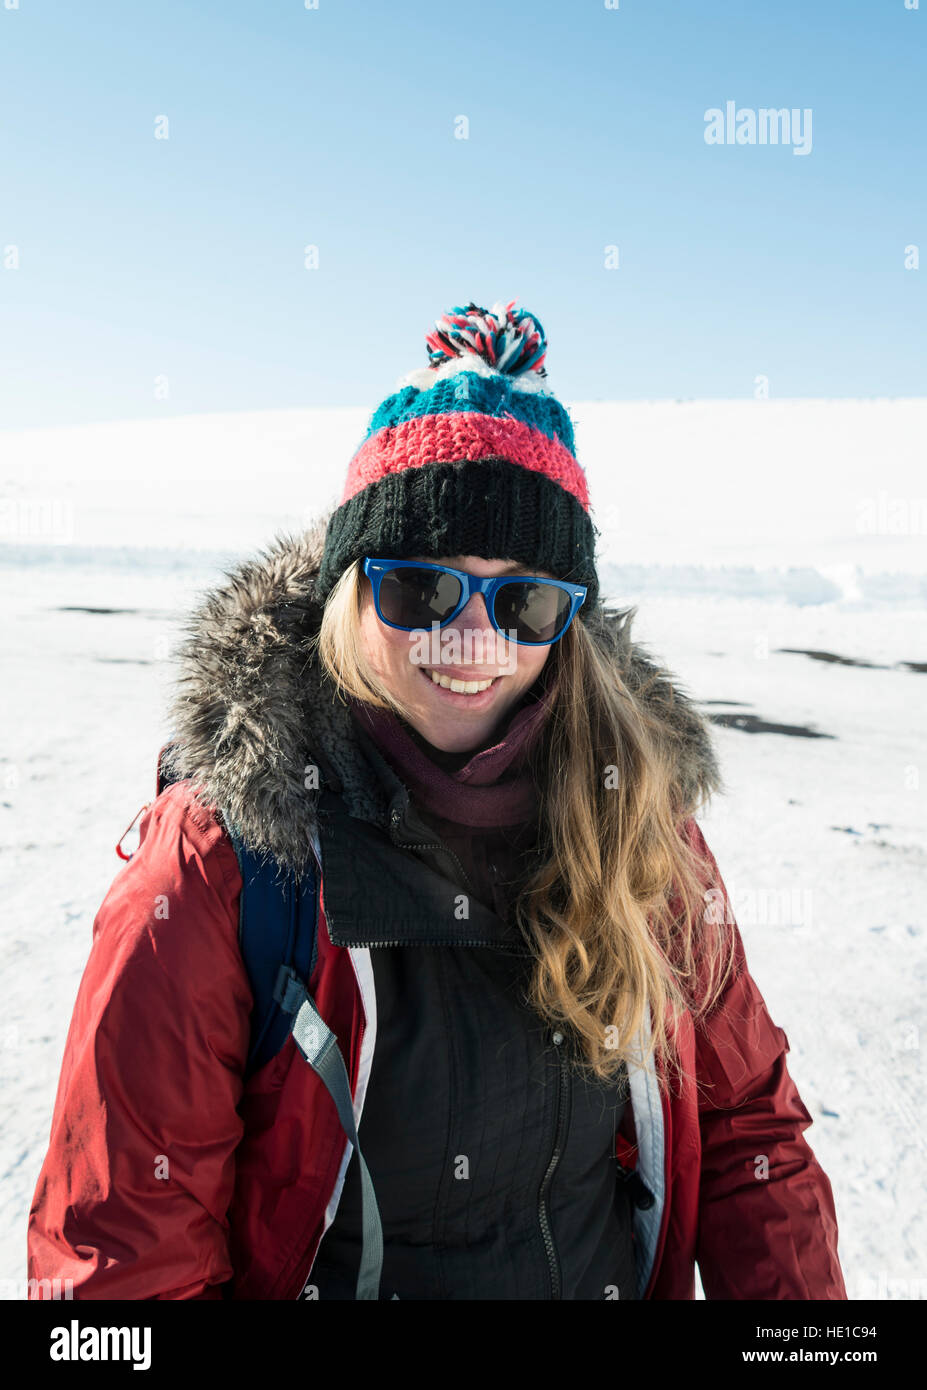 Young woman wearing winter jacket and woolly hat, smiling, snowy landscape, Iceland Stock Photo